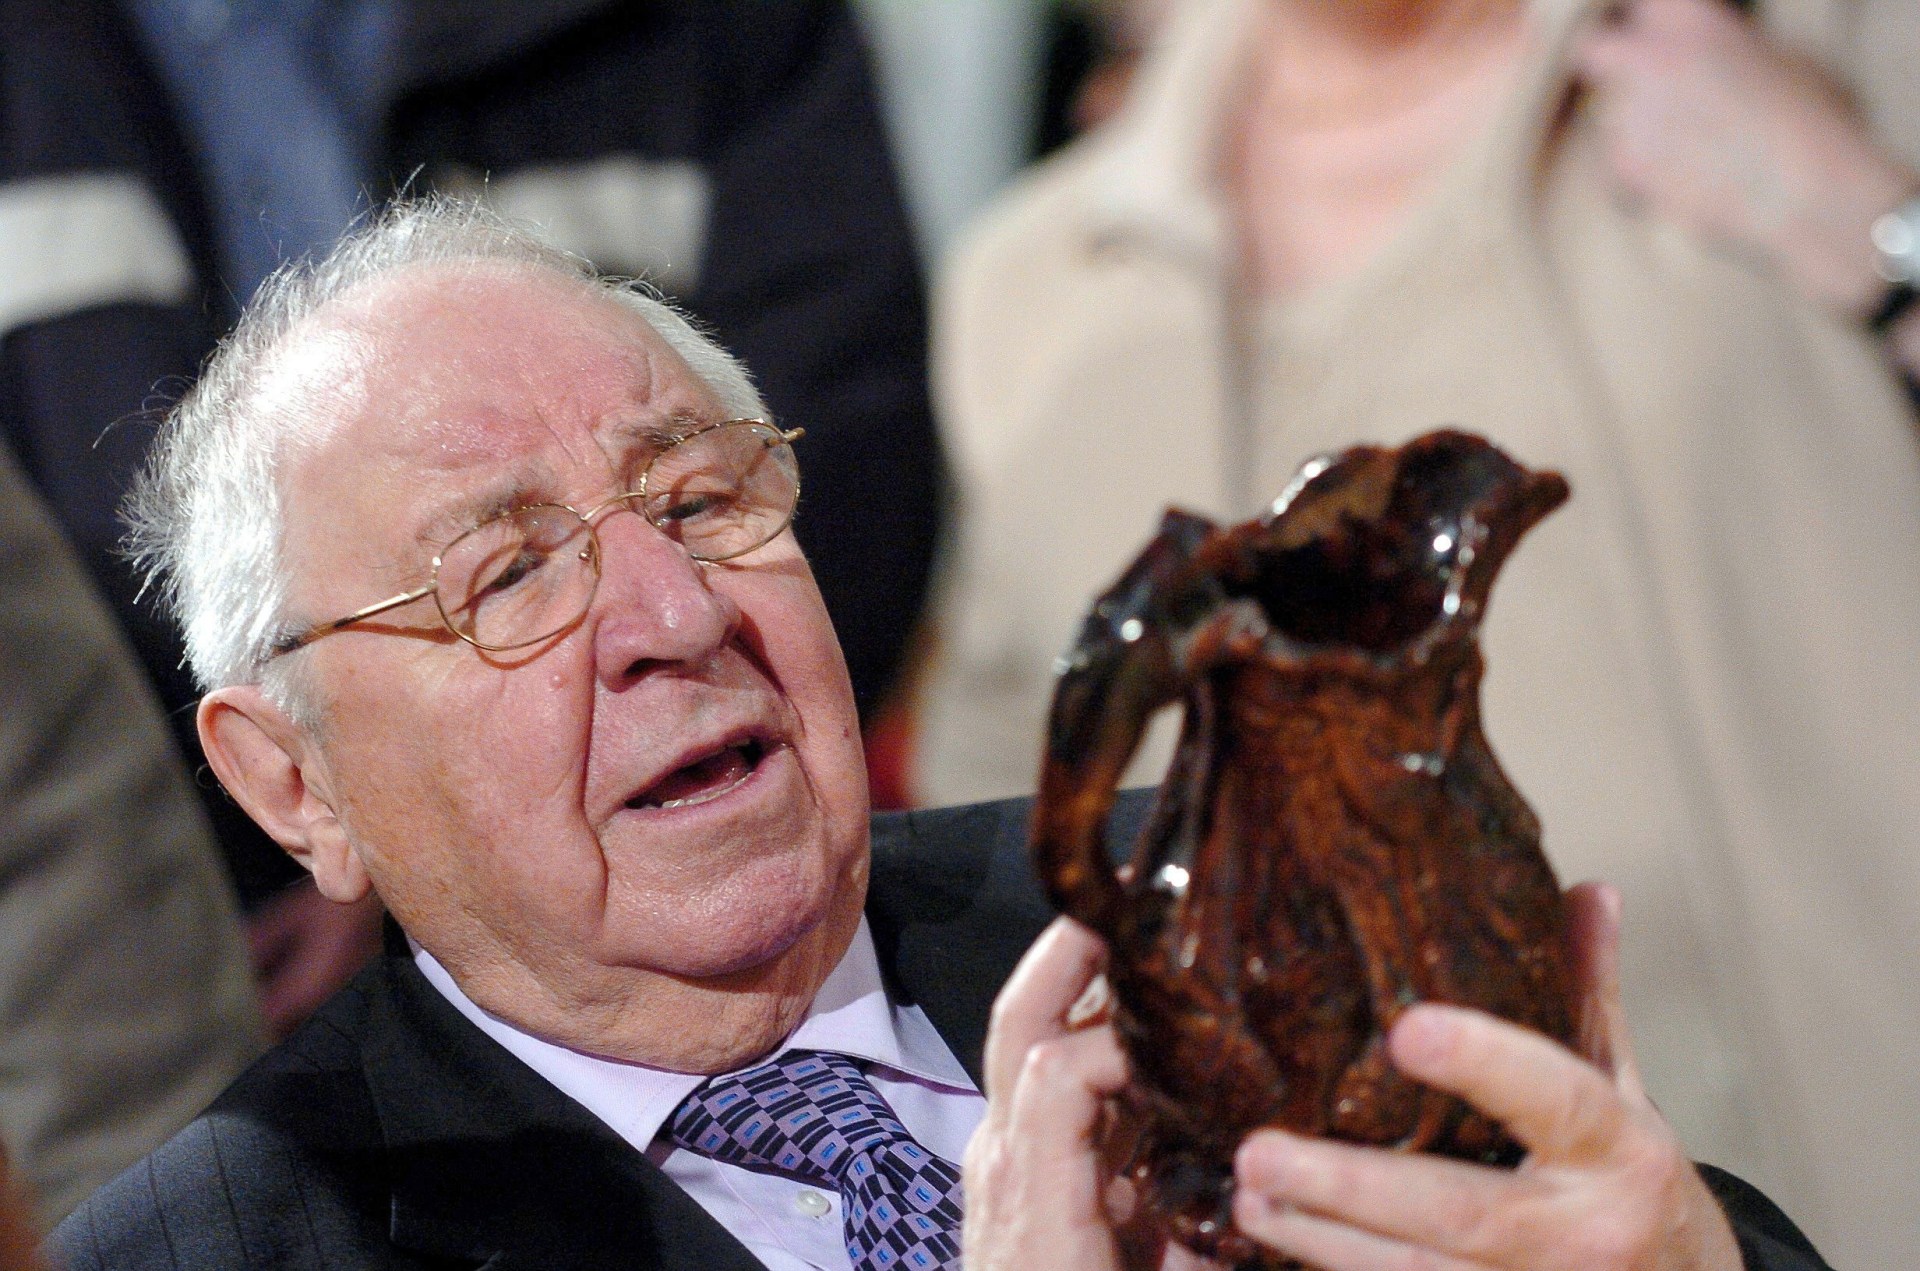 antiques roadshow expert henry sandon dies aged 95 on christmas morning